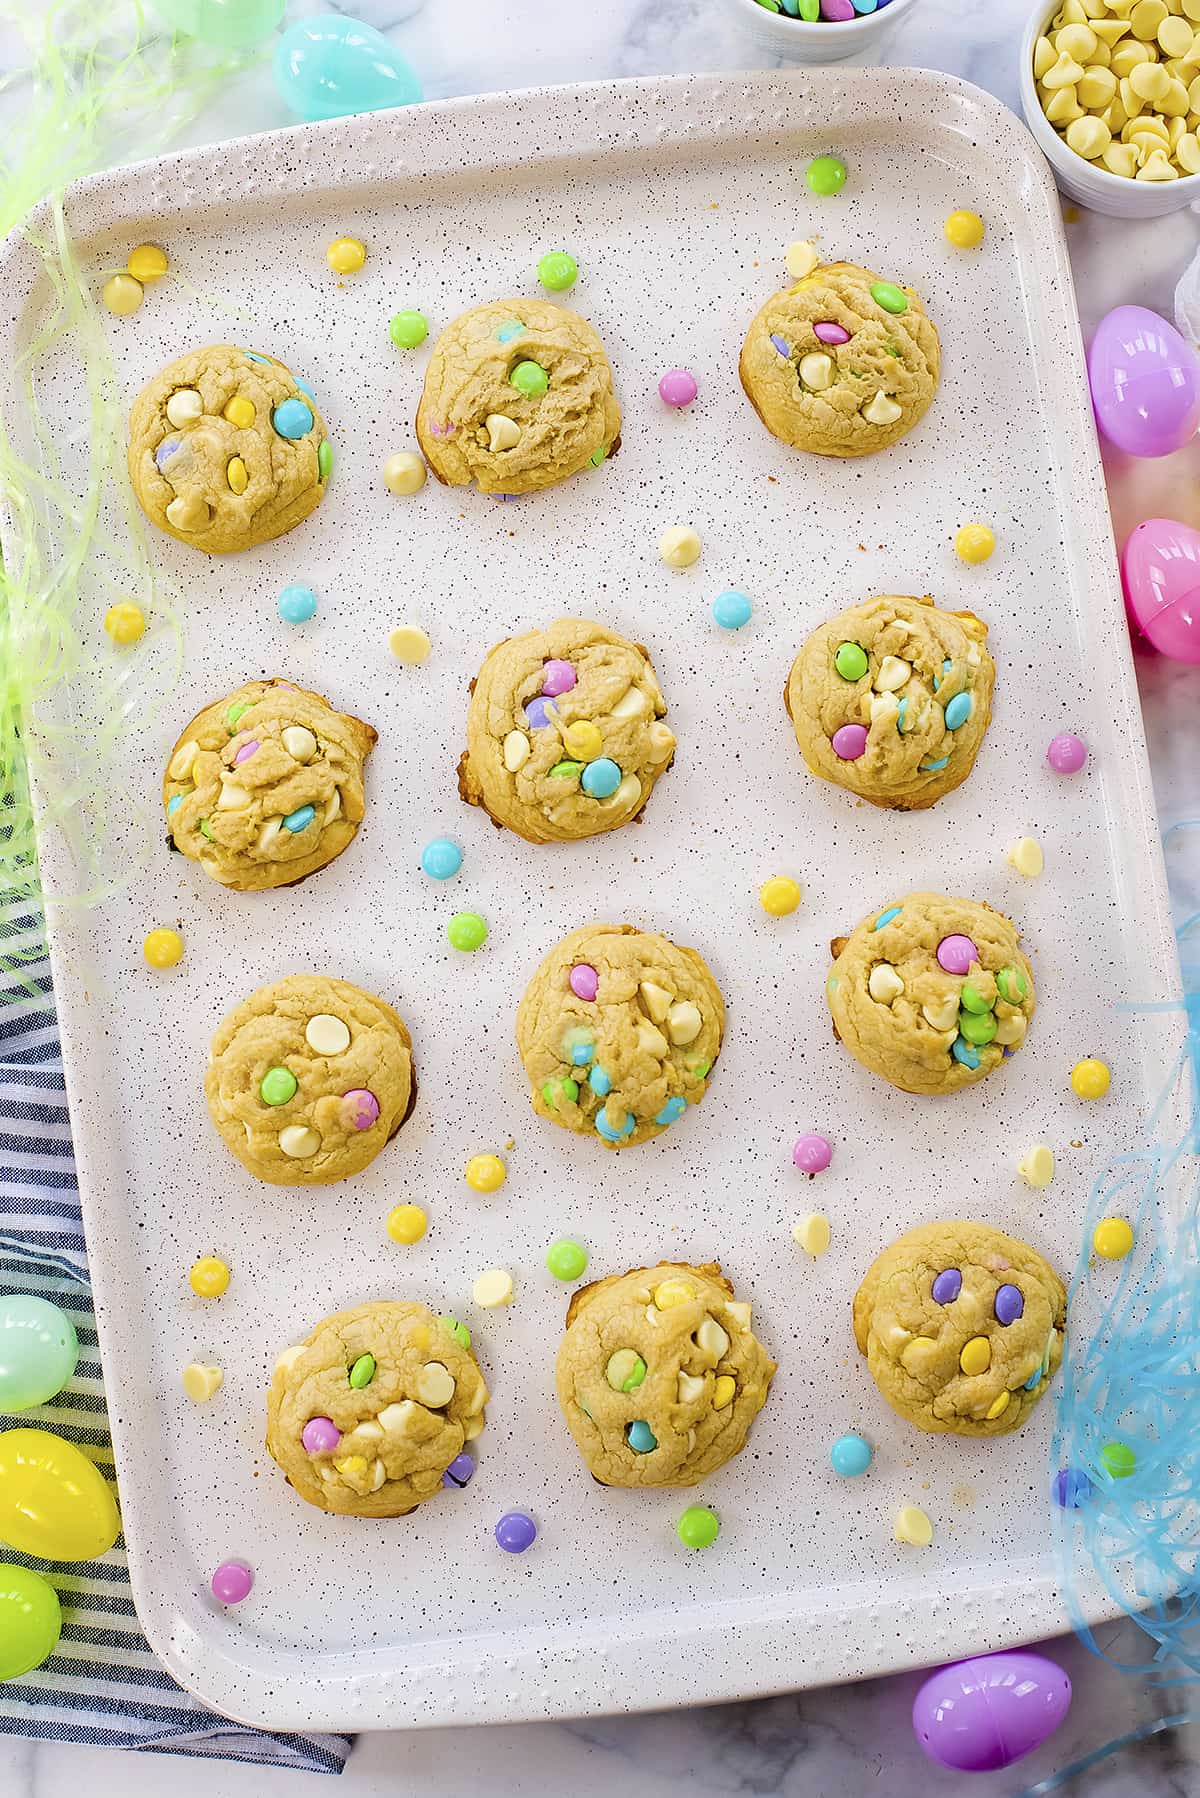 Brown Butter M&M Cookies - Bakery Worthy! - That Skinny Chick Can Bake